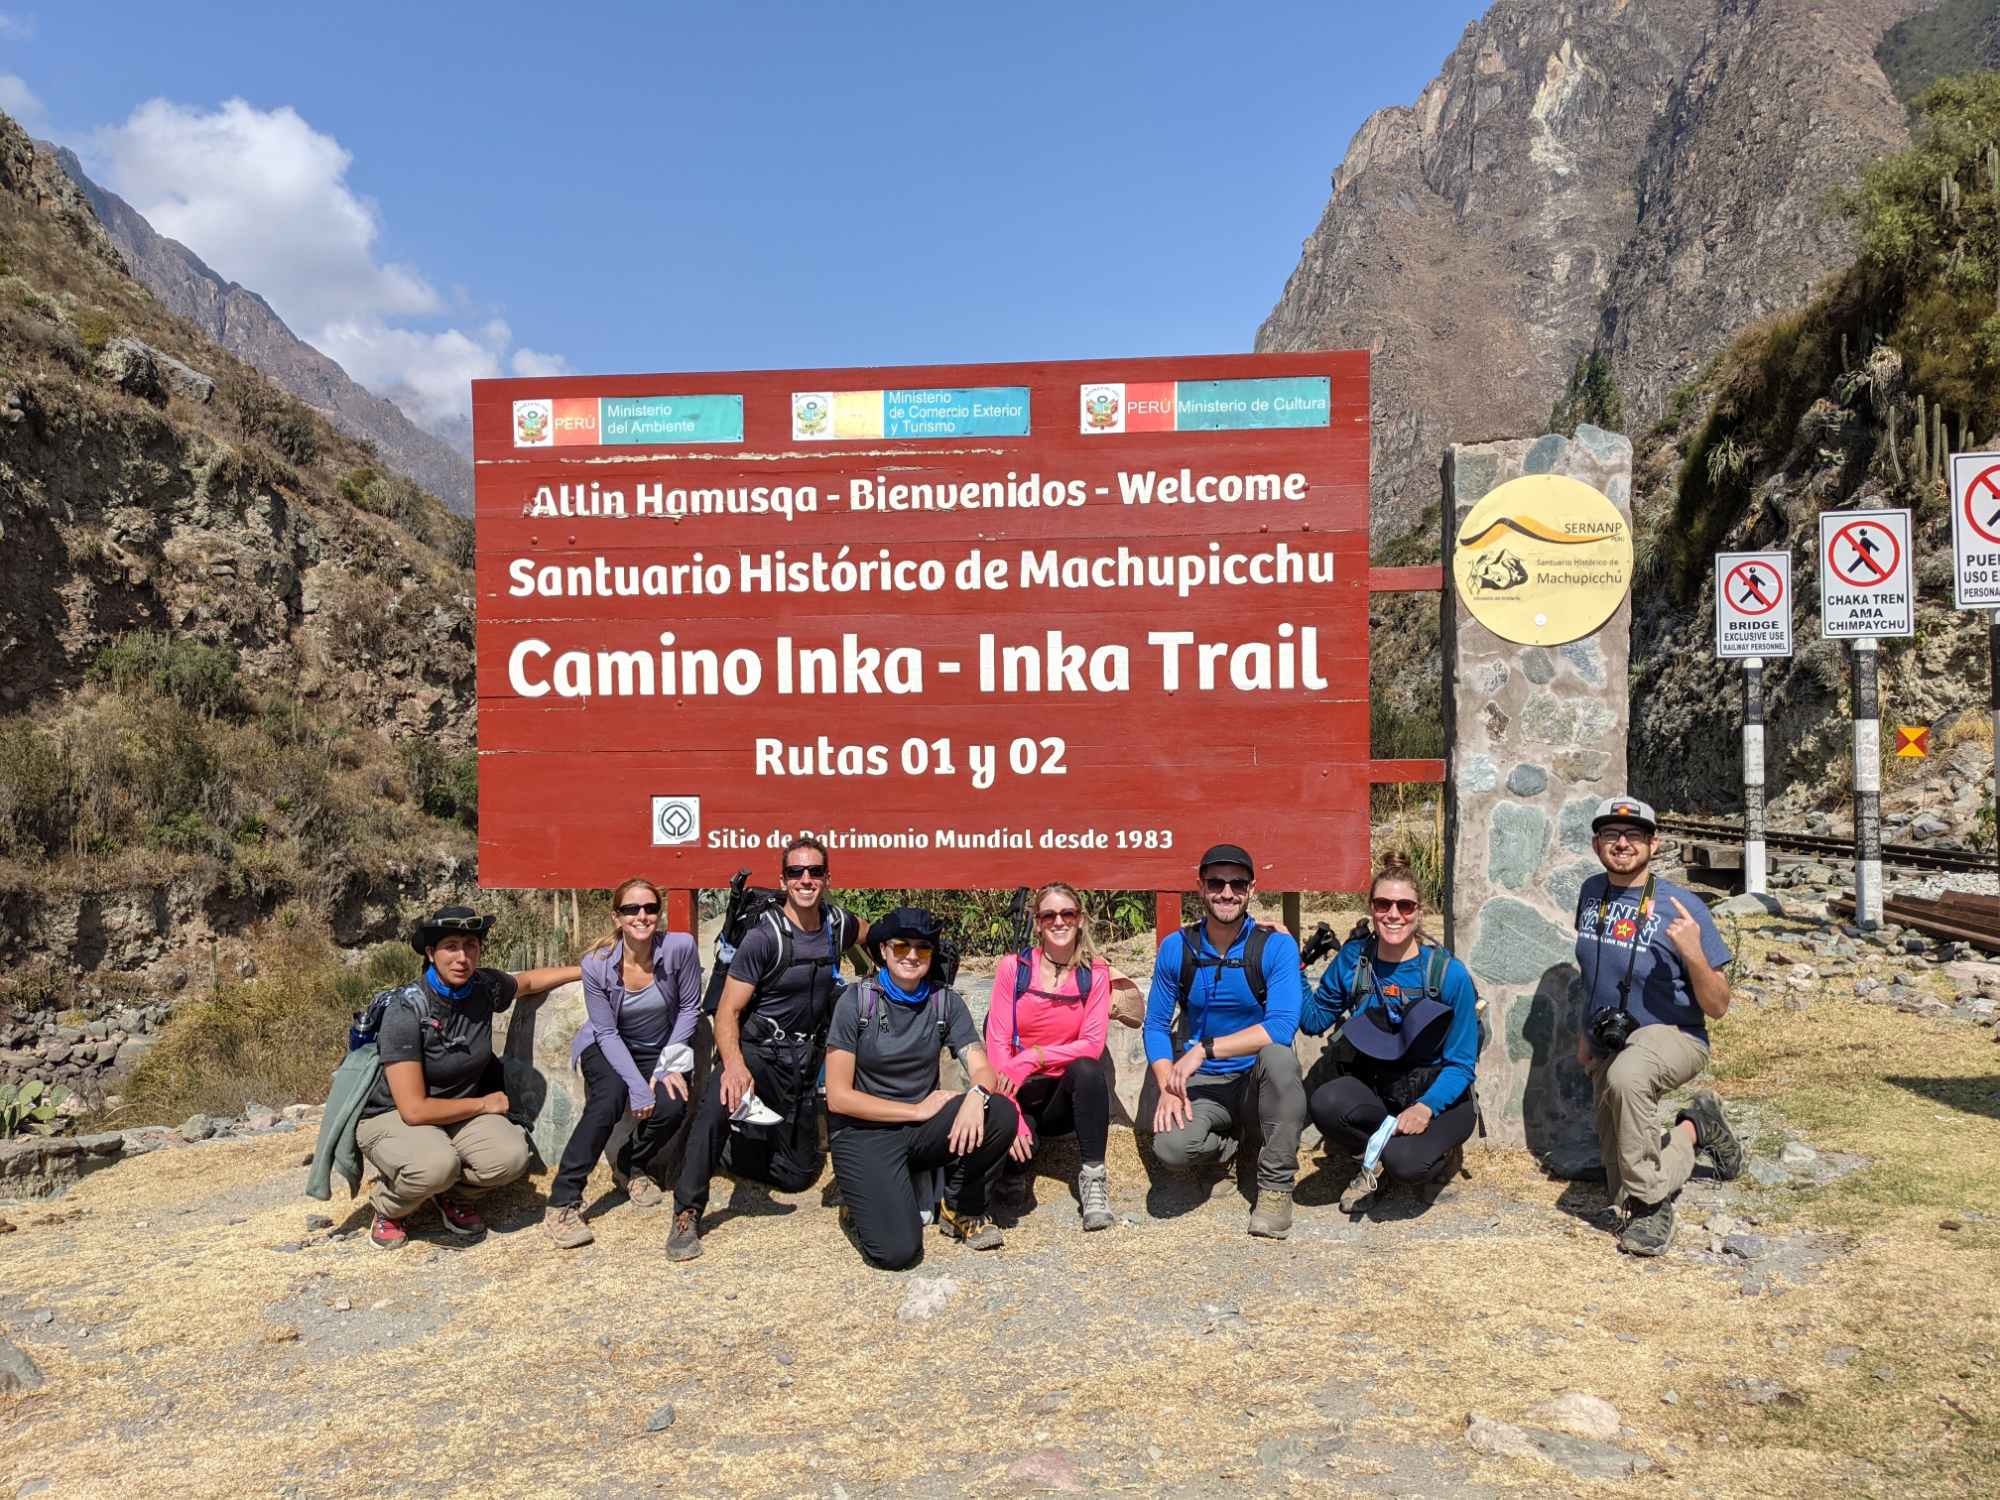 The Ultimate Guide to Training for the Inca Trail and Machu Picchu